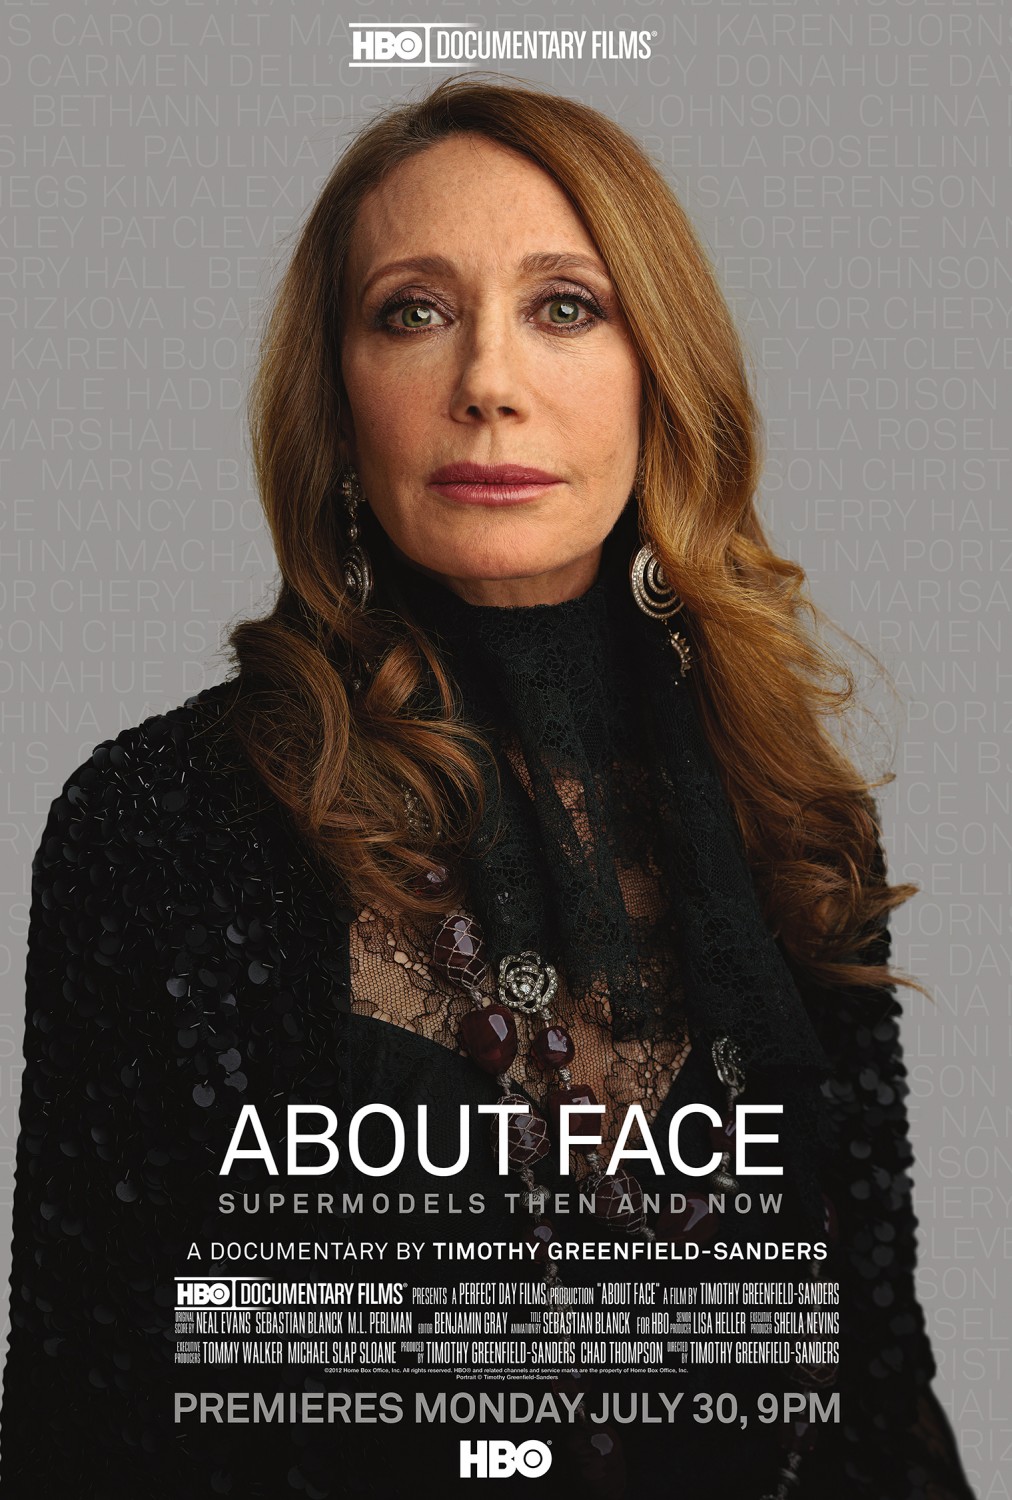 Extra Large TV Poster Image for About Face: Supermodels Then and Now (#7 of 7)